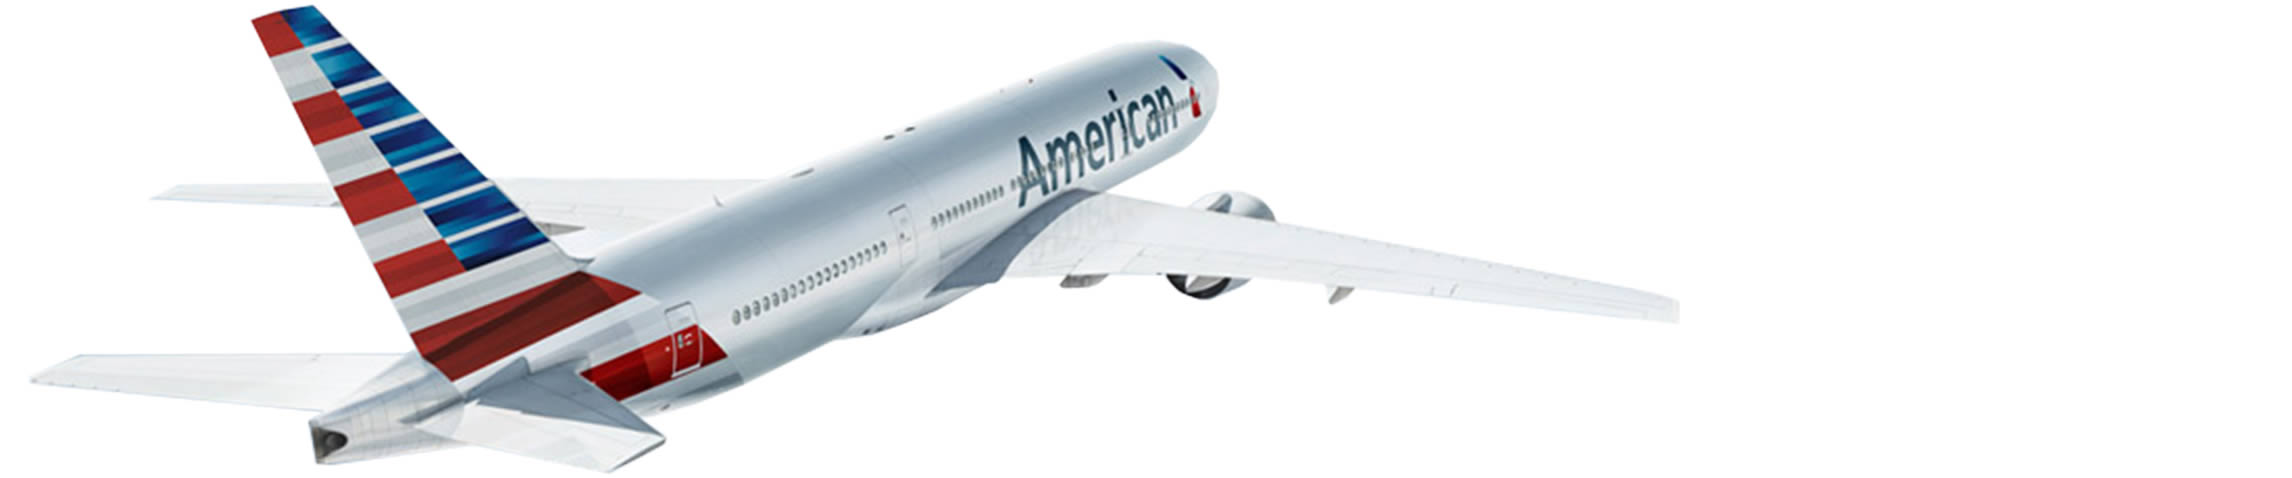 A Plane With The New American Livery - American Airlines, Transparent background PNG HD thumbnail